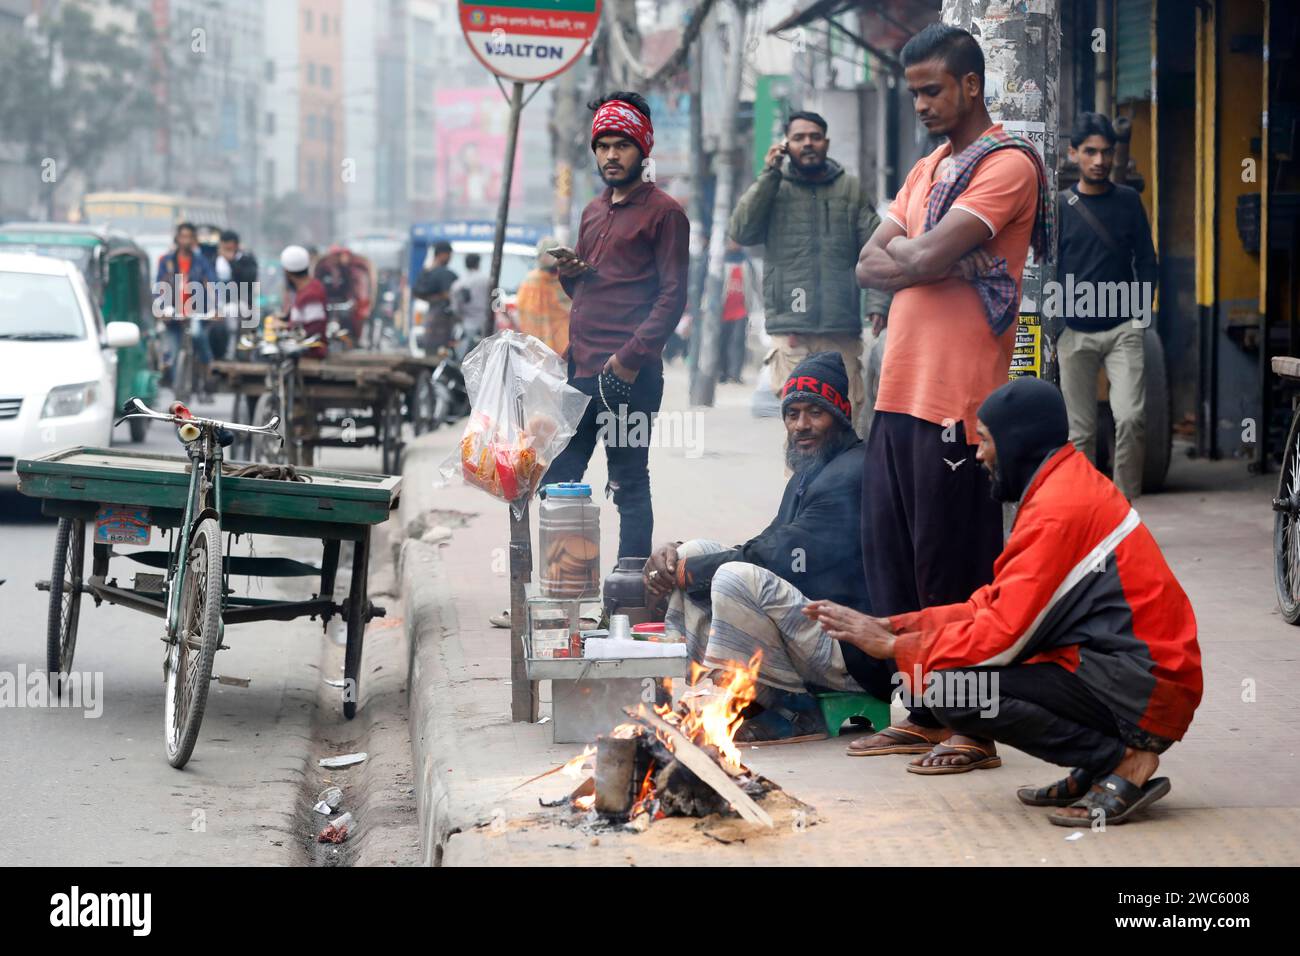 Dhaka, Bangladesh - January 14, 2024: The severe winters across the country are the most difficult for the destitute people. They have lit a fire to g Stock Photo